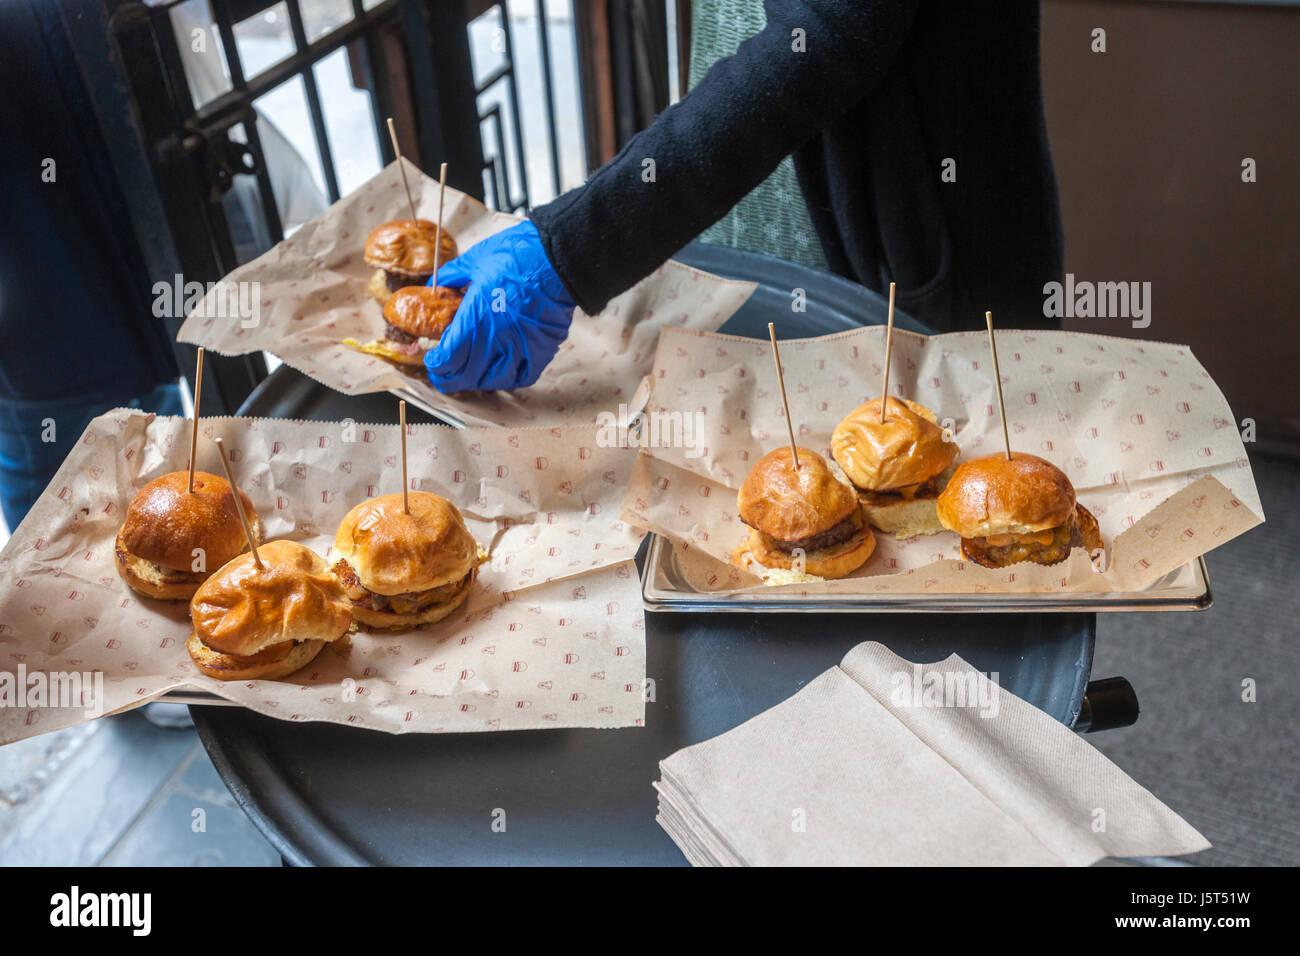 Bareburger Organic serves sliders after the unveiling of the new wayfinding kiosks that stand at either end of Restaurant Row in New York, West 46th street between 8th and 9th Avenues, on Tuesday May 16, 2017. At least four years in the making the illuminated kiosks show the names of the many eateries that populate the street. The unveiling is just in time for the Taste of Times Square event taking place on the street on June 5. (© Richard B. Levine) Stock Photo